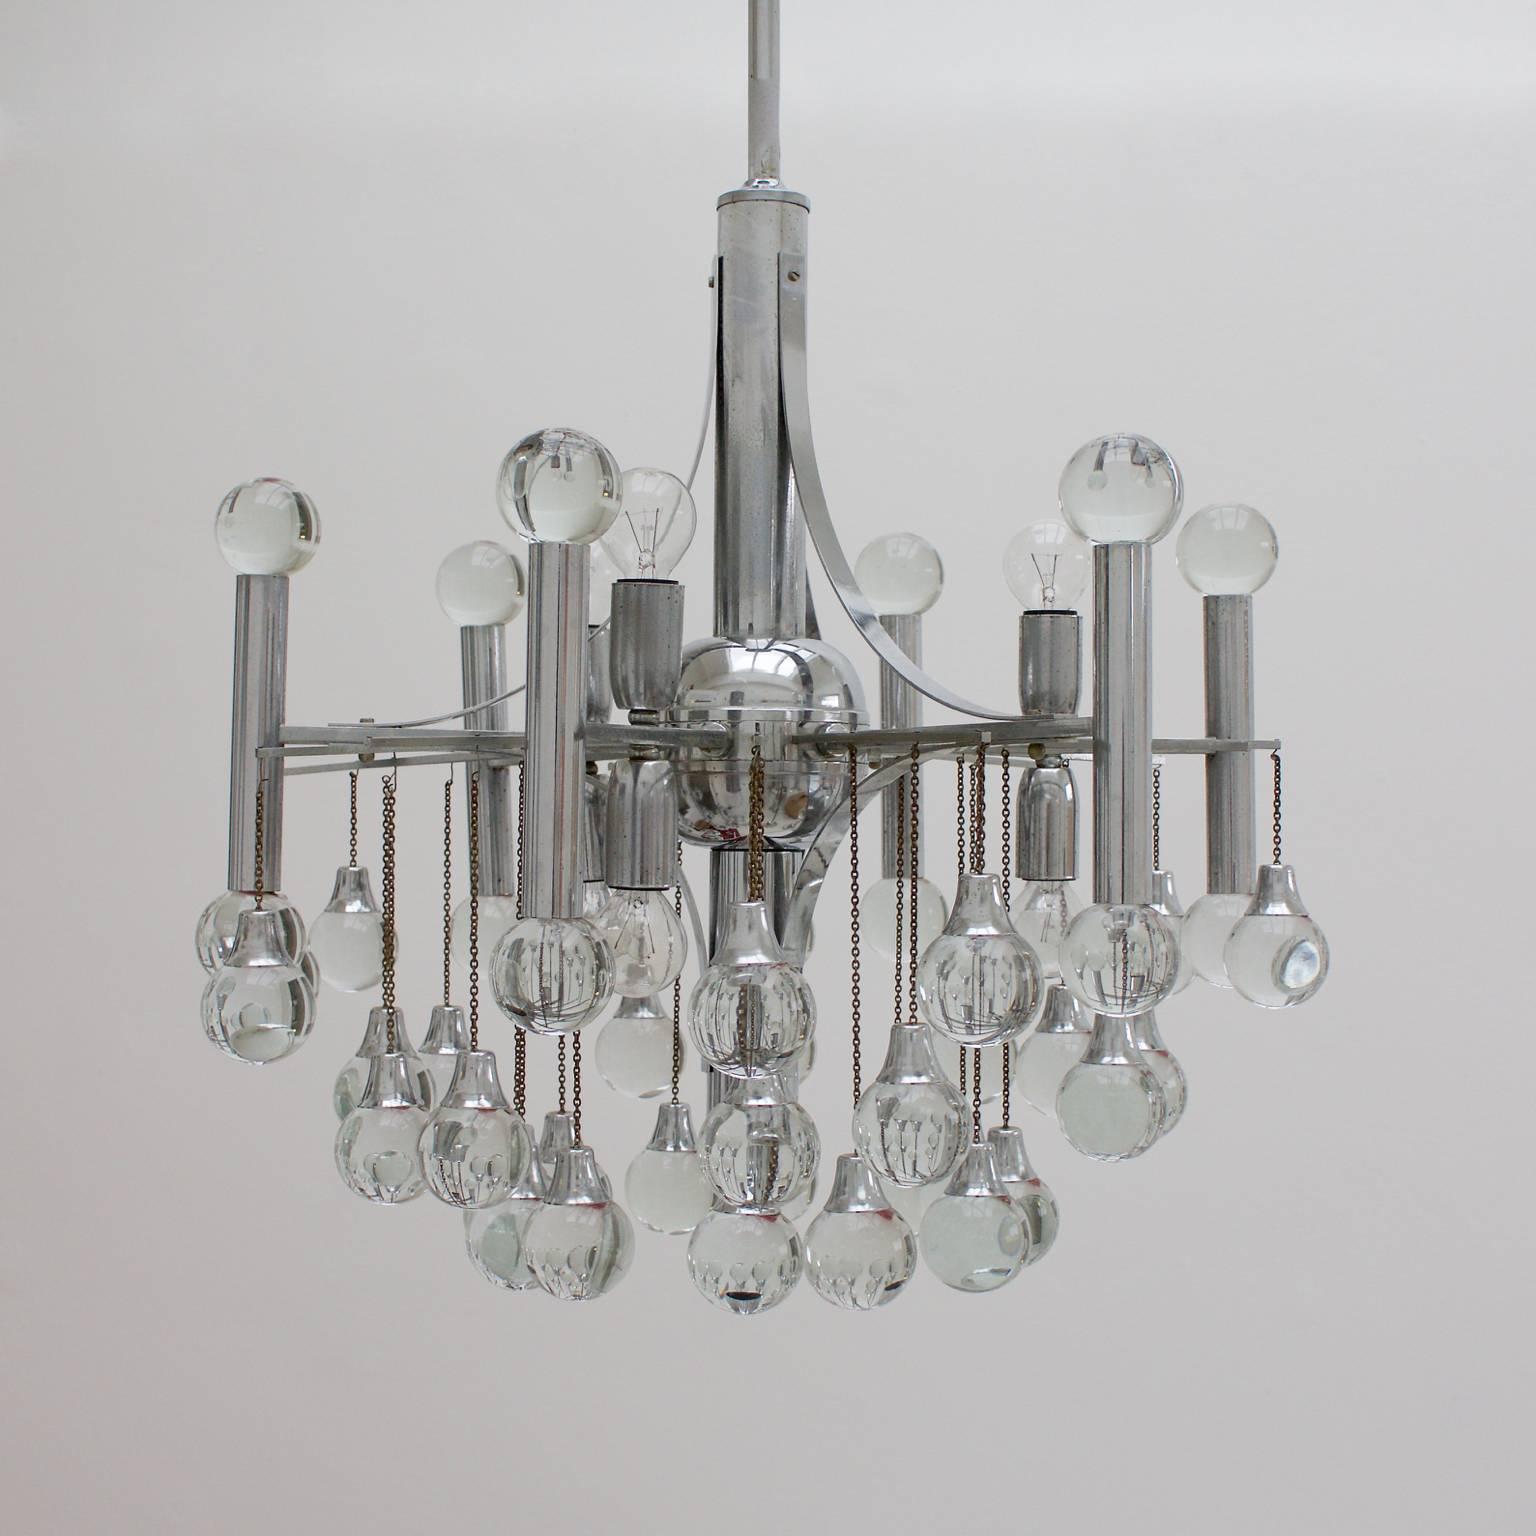 Chandelier by Sciolari, with chrome body and 48 glass balls - 12 on the six main verticals and 36 hanging on chains of varying heights (all in place). The piece has seven lights (three pairs of uplighters/downlighters taking SES bulbs and a single